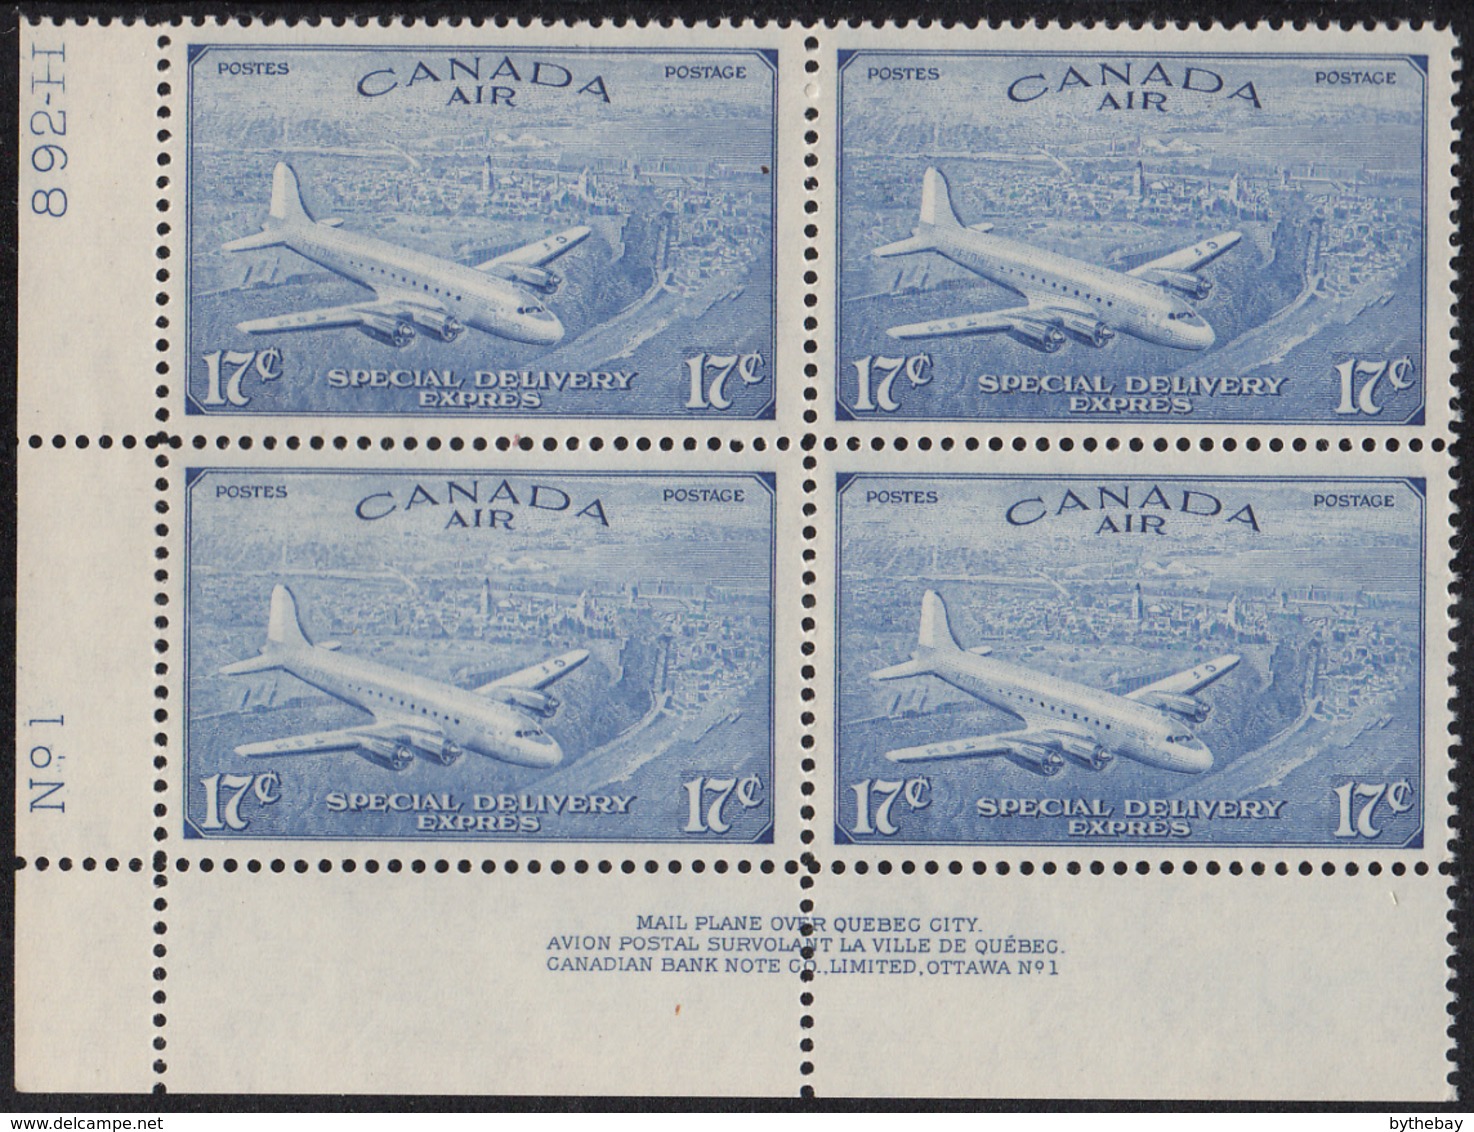 Canada 1946 MNH Sc CE3 17c D.C. 4-M Airplane Plate 1 Lower Left Plate Block - Luchtpost: Toeslag